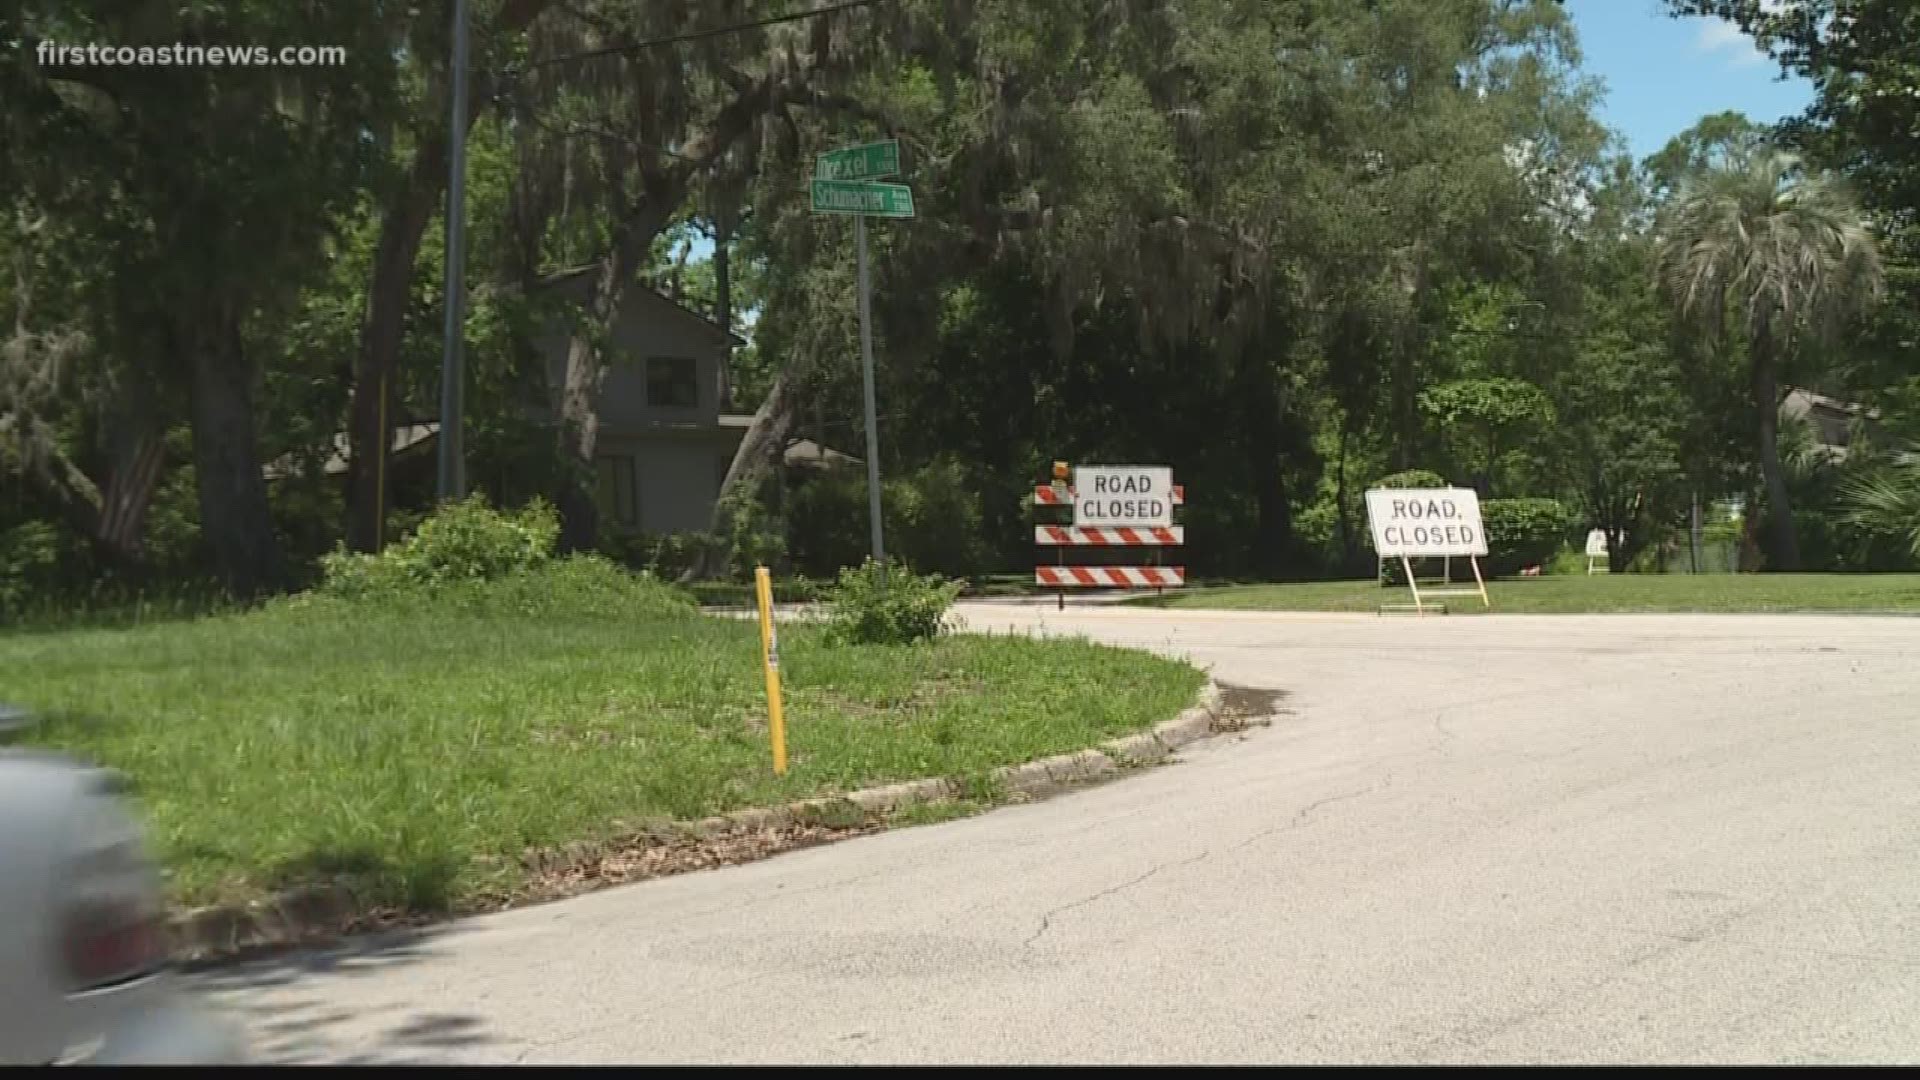 The road is in need of repair and residents are upset, saying the City said they would fix it.